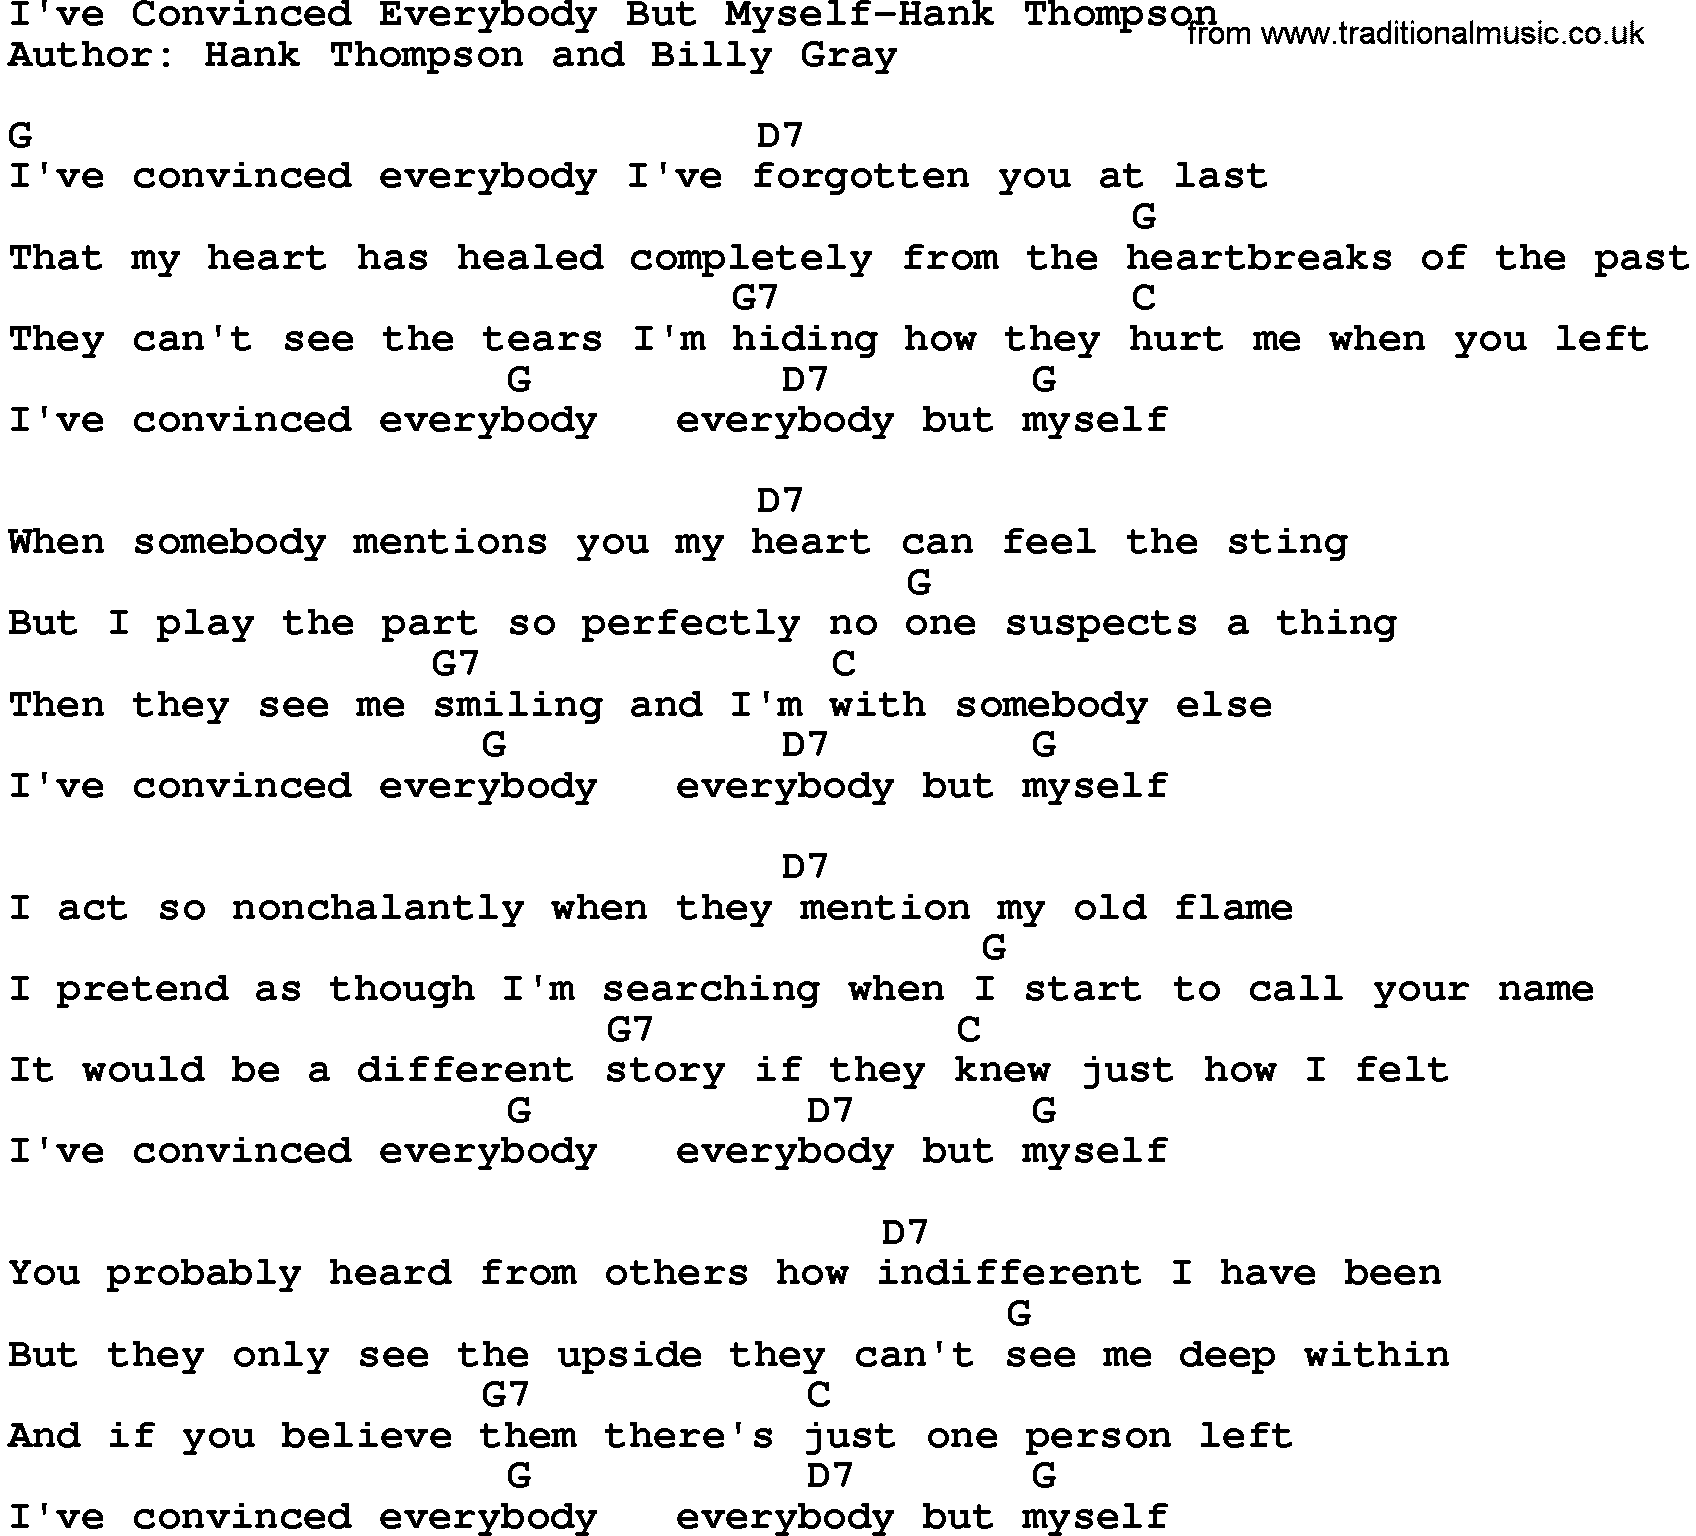 Country music song: I've Convinced Everybody But Myself-Hank Thompson lyrics and chords